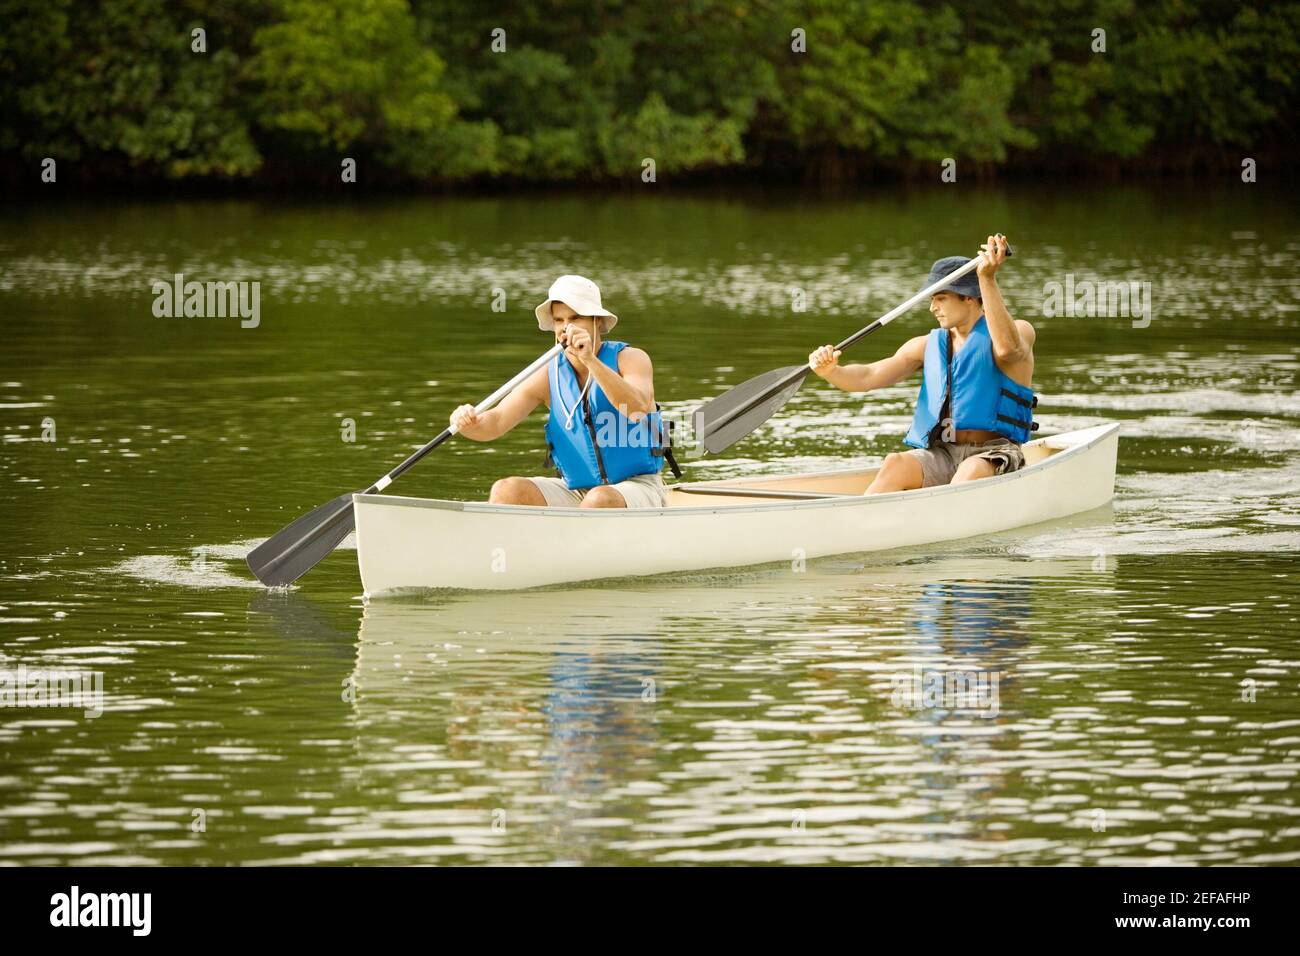 Two mid adult men boating in a lake Stock Photo